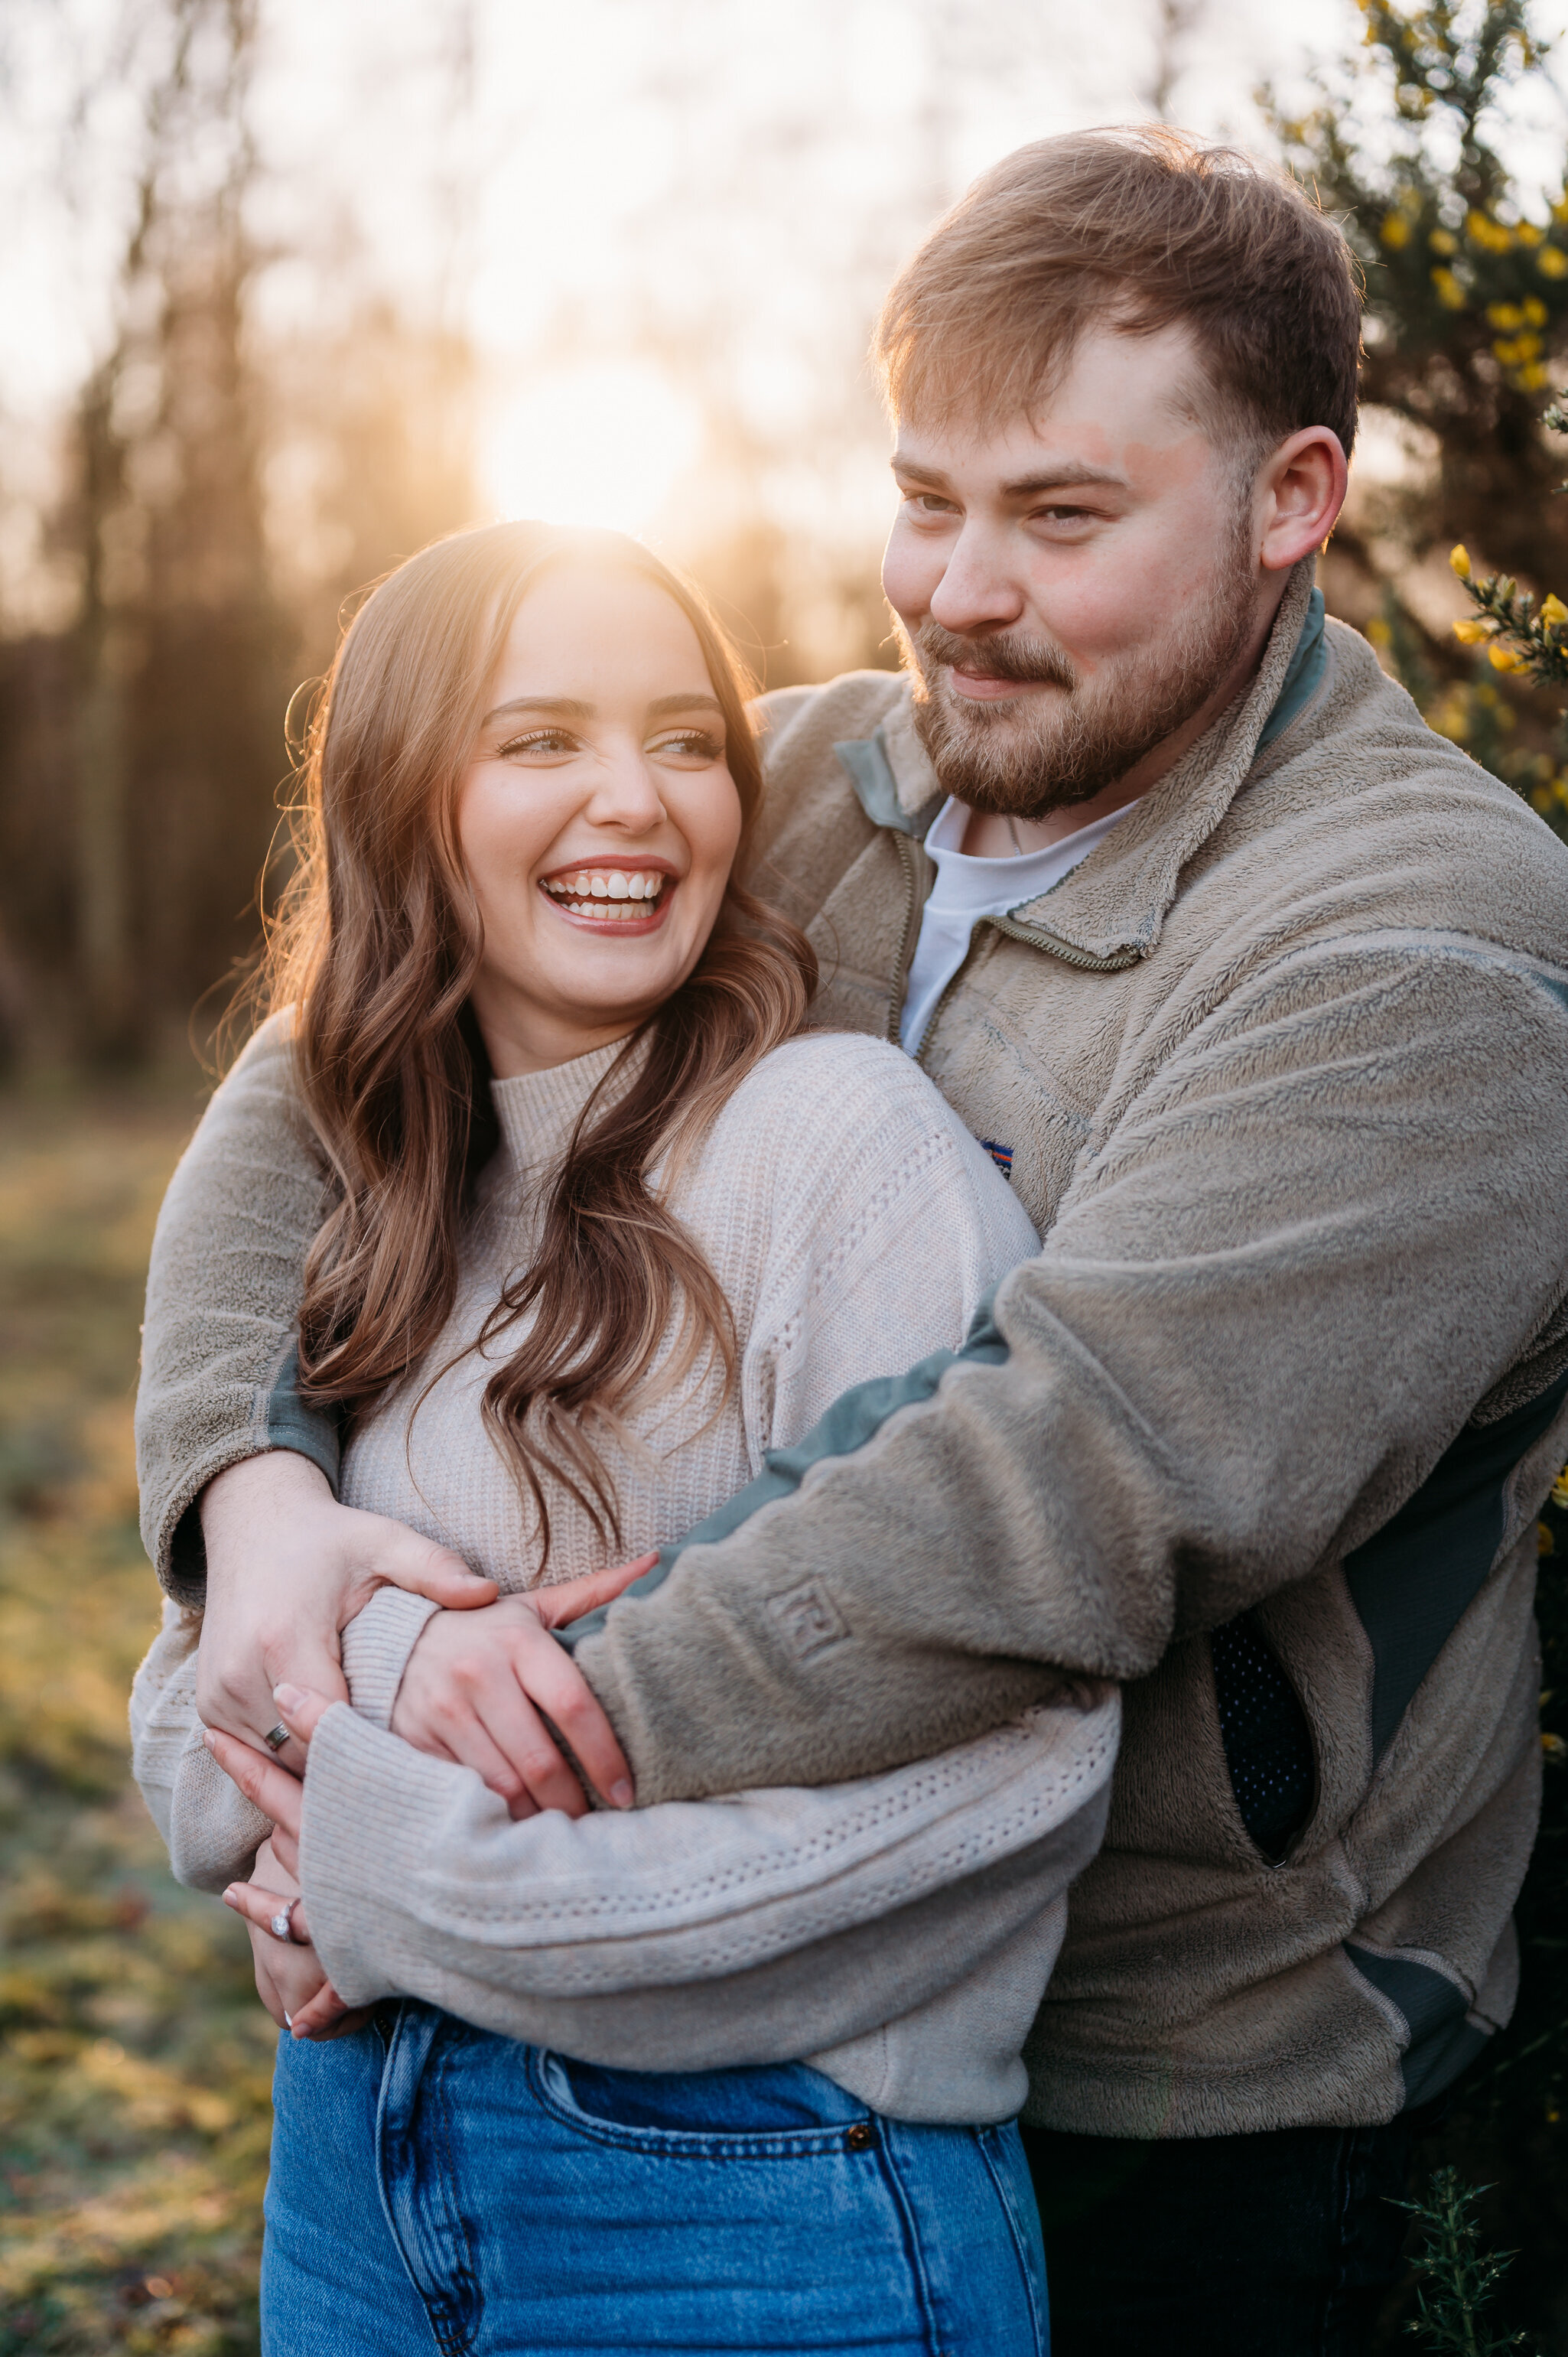 couples and engagement photographer in York, UK servicing Leeds, Harrogate, York and Yorkshire